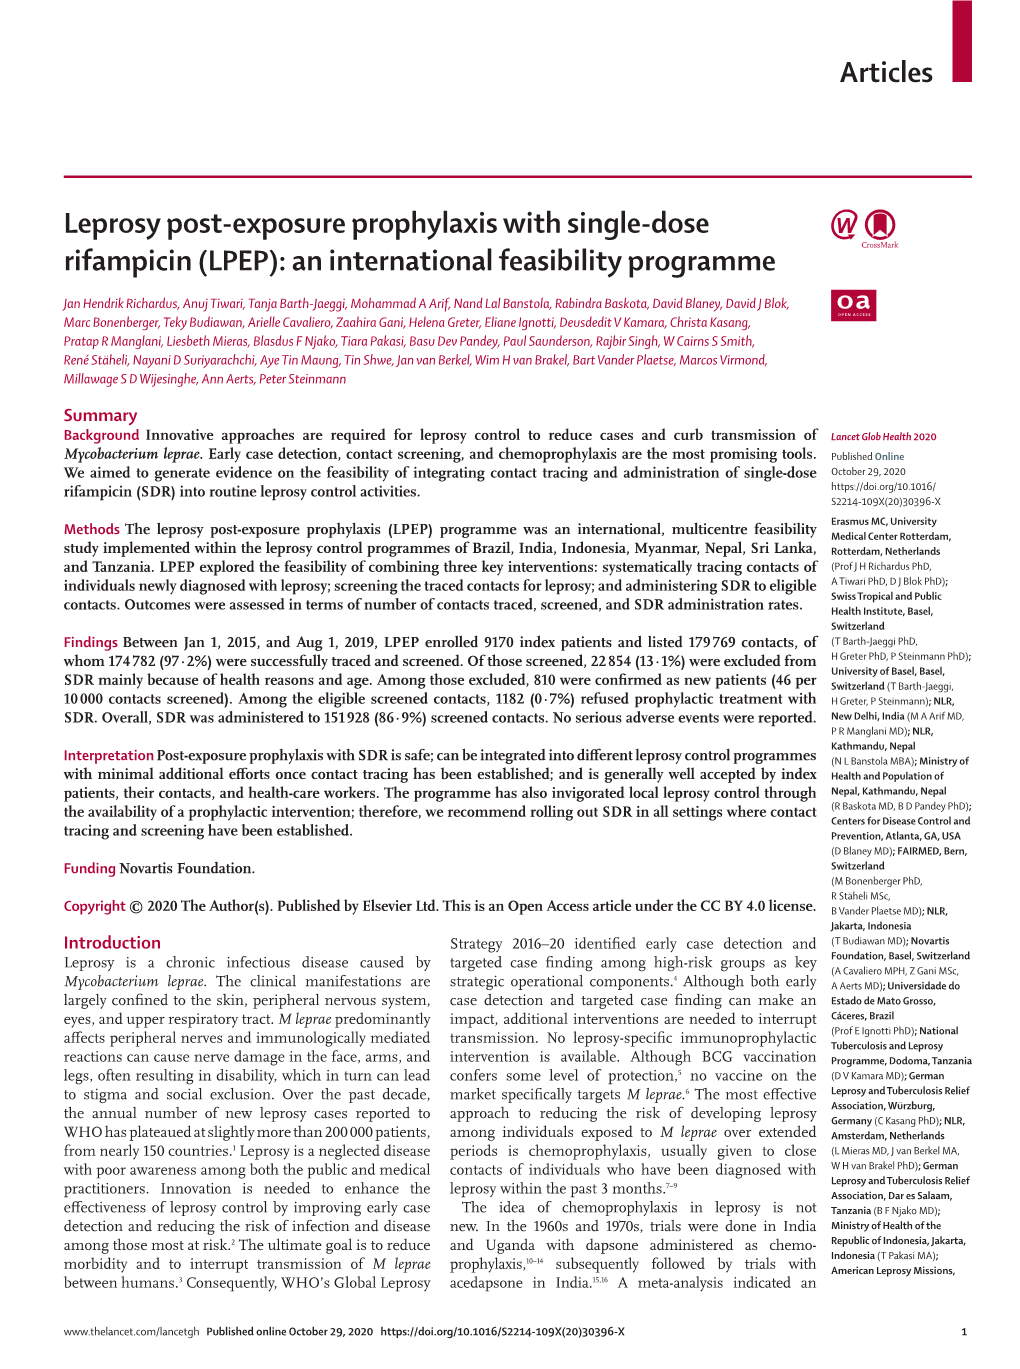 Leprosy Post-Exposure Prophylaxis with Single-Dose Rifampicin (LPEP): an International Feasibility Programme